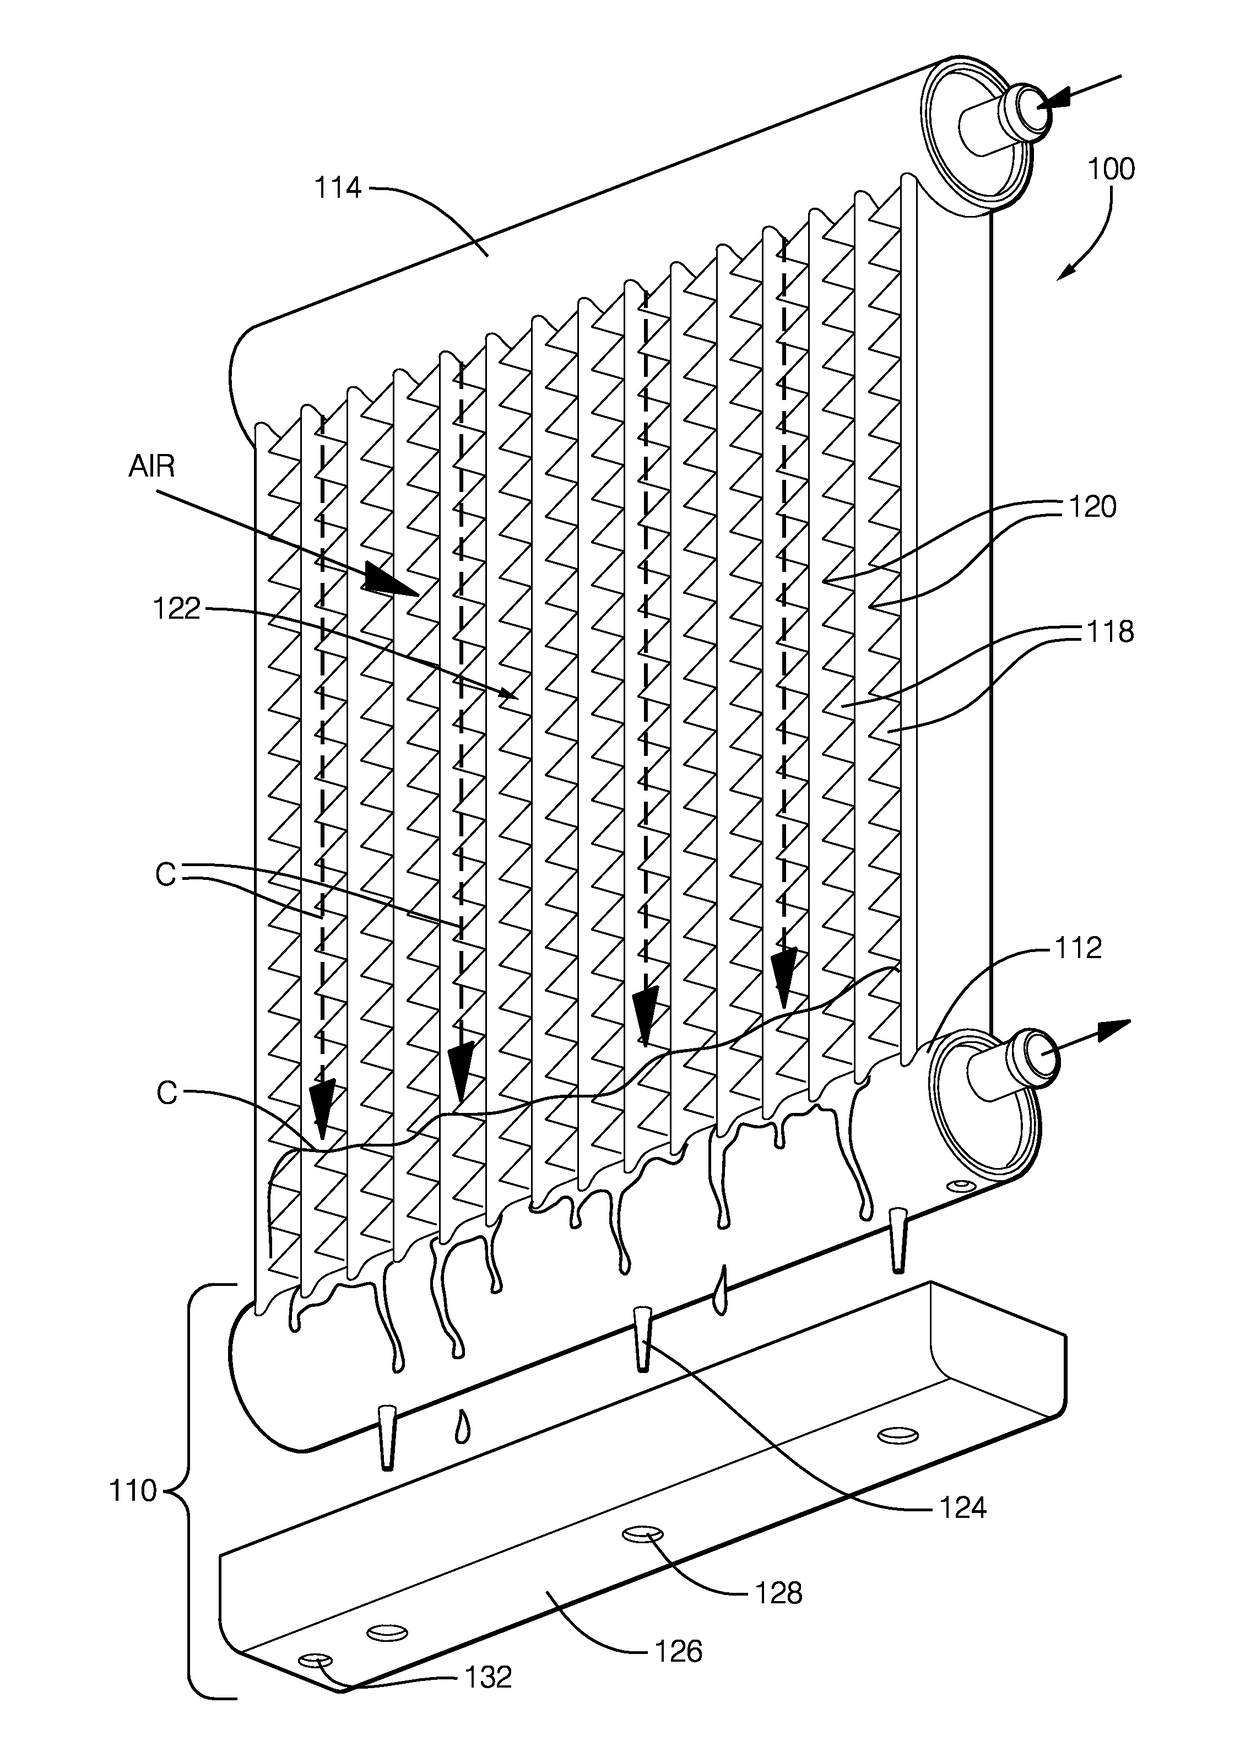 Heat exchanger assembly having a heated condensate drainage system